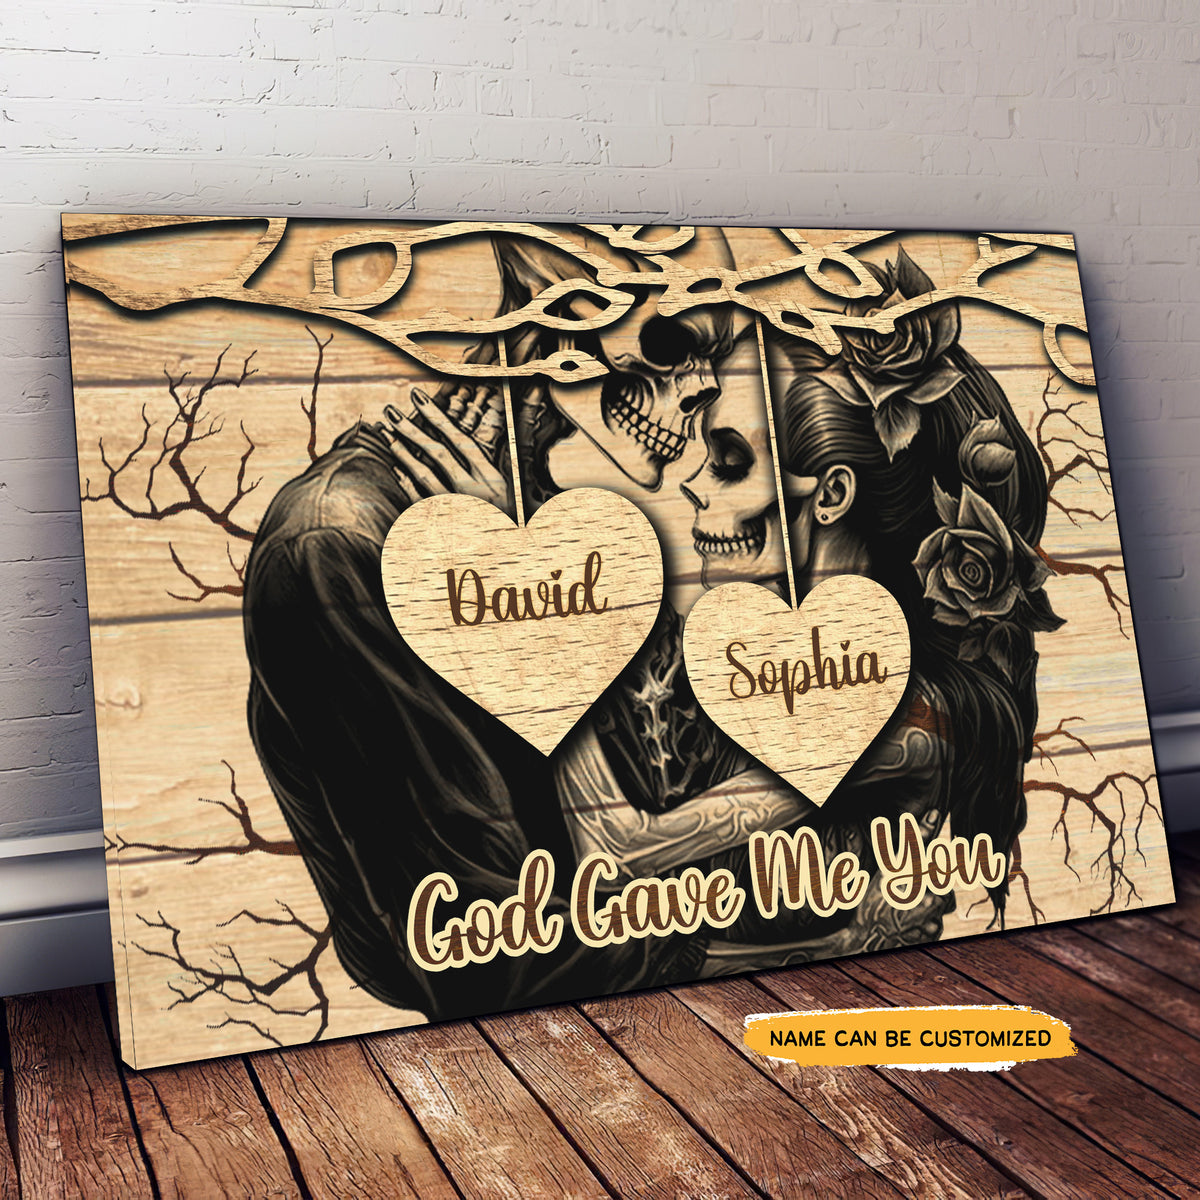 God Gave Me You - Custom Personalized Names Gothic Skull And Roses Canvas